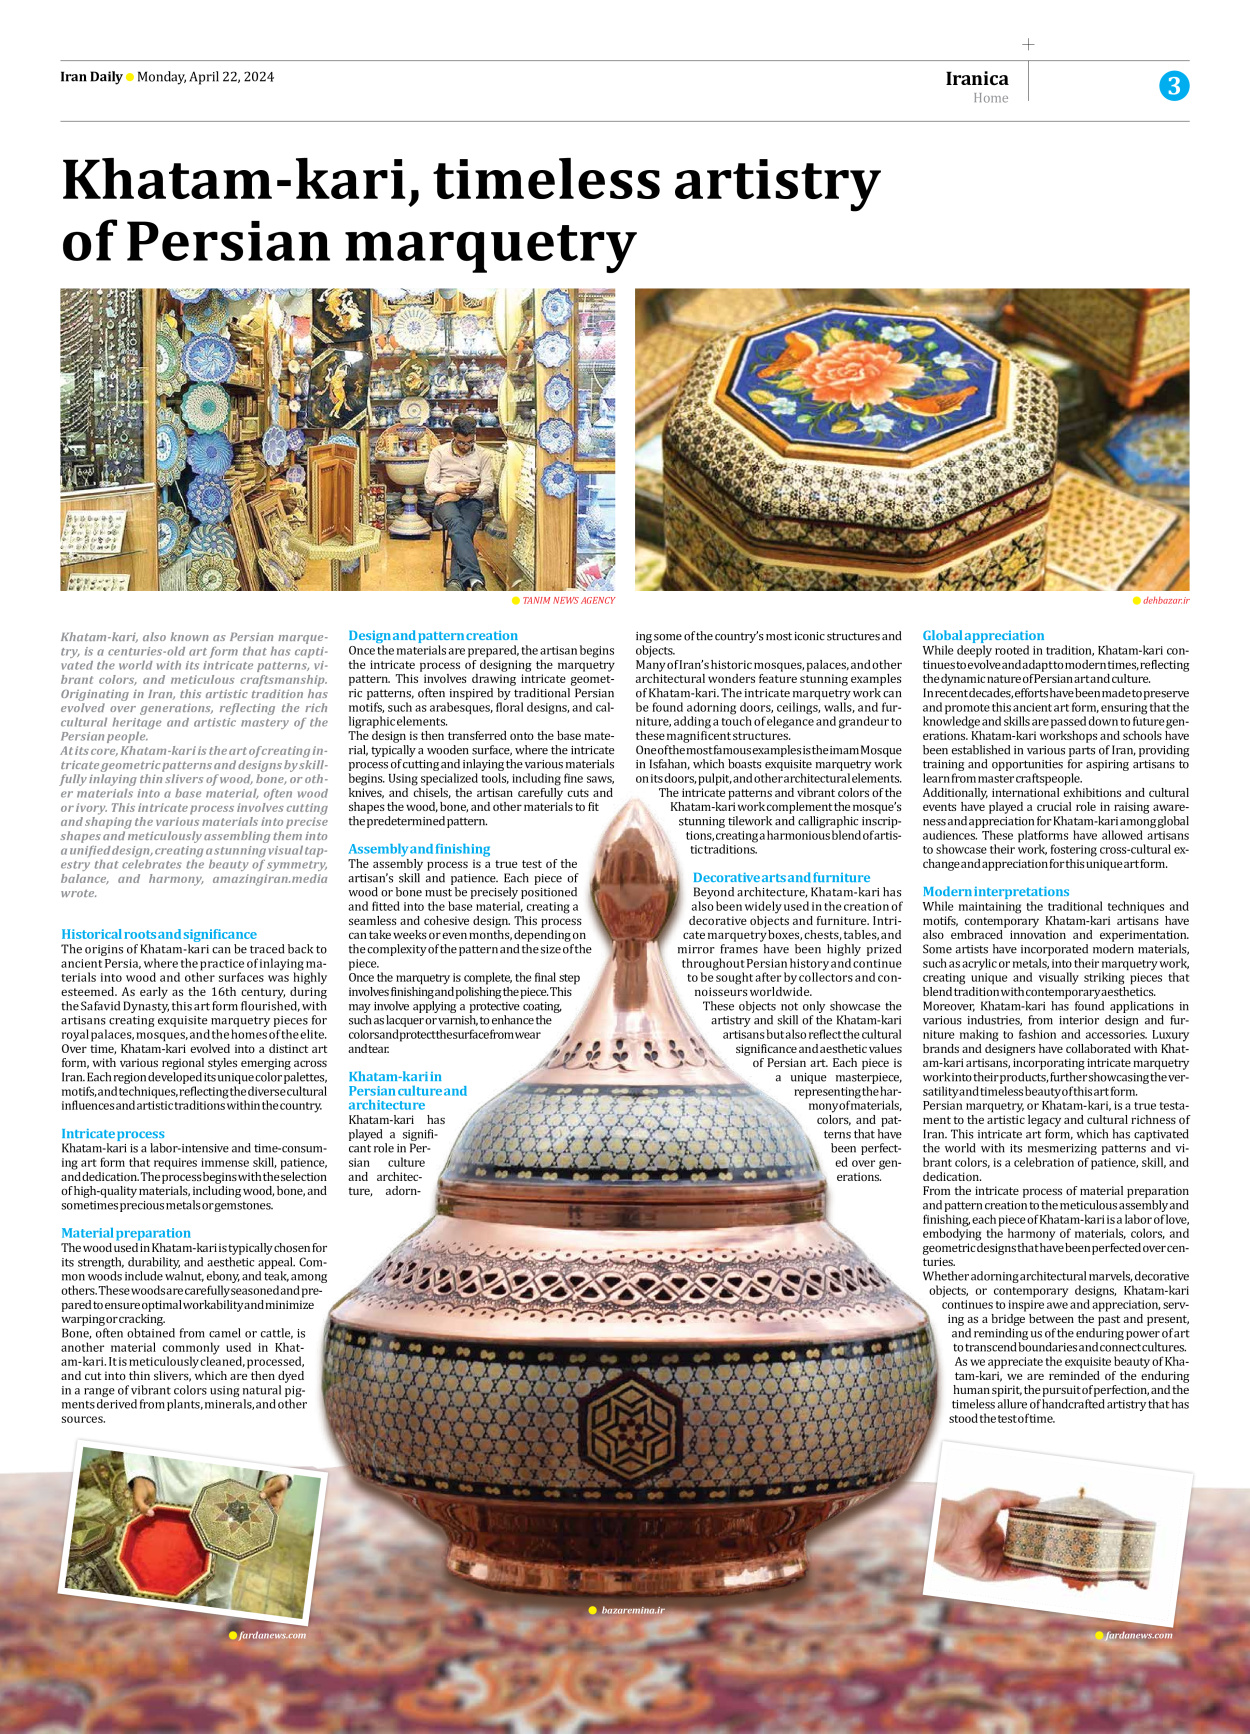 Iran Daily - Number Seven Thousand Five Hundred and Thirty Nine - 22 April 2024 - Page 3